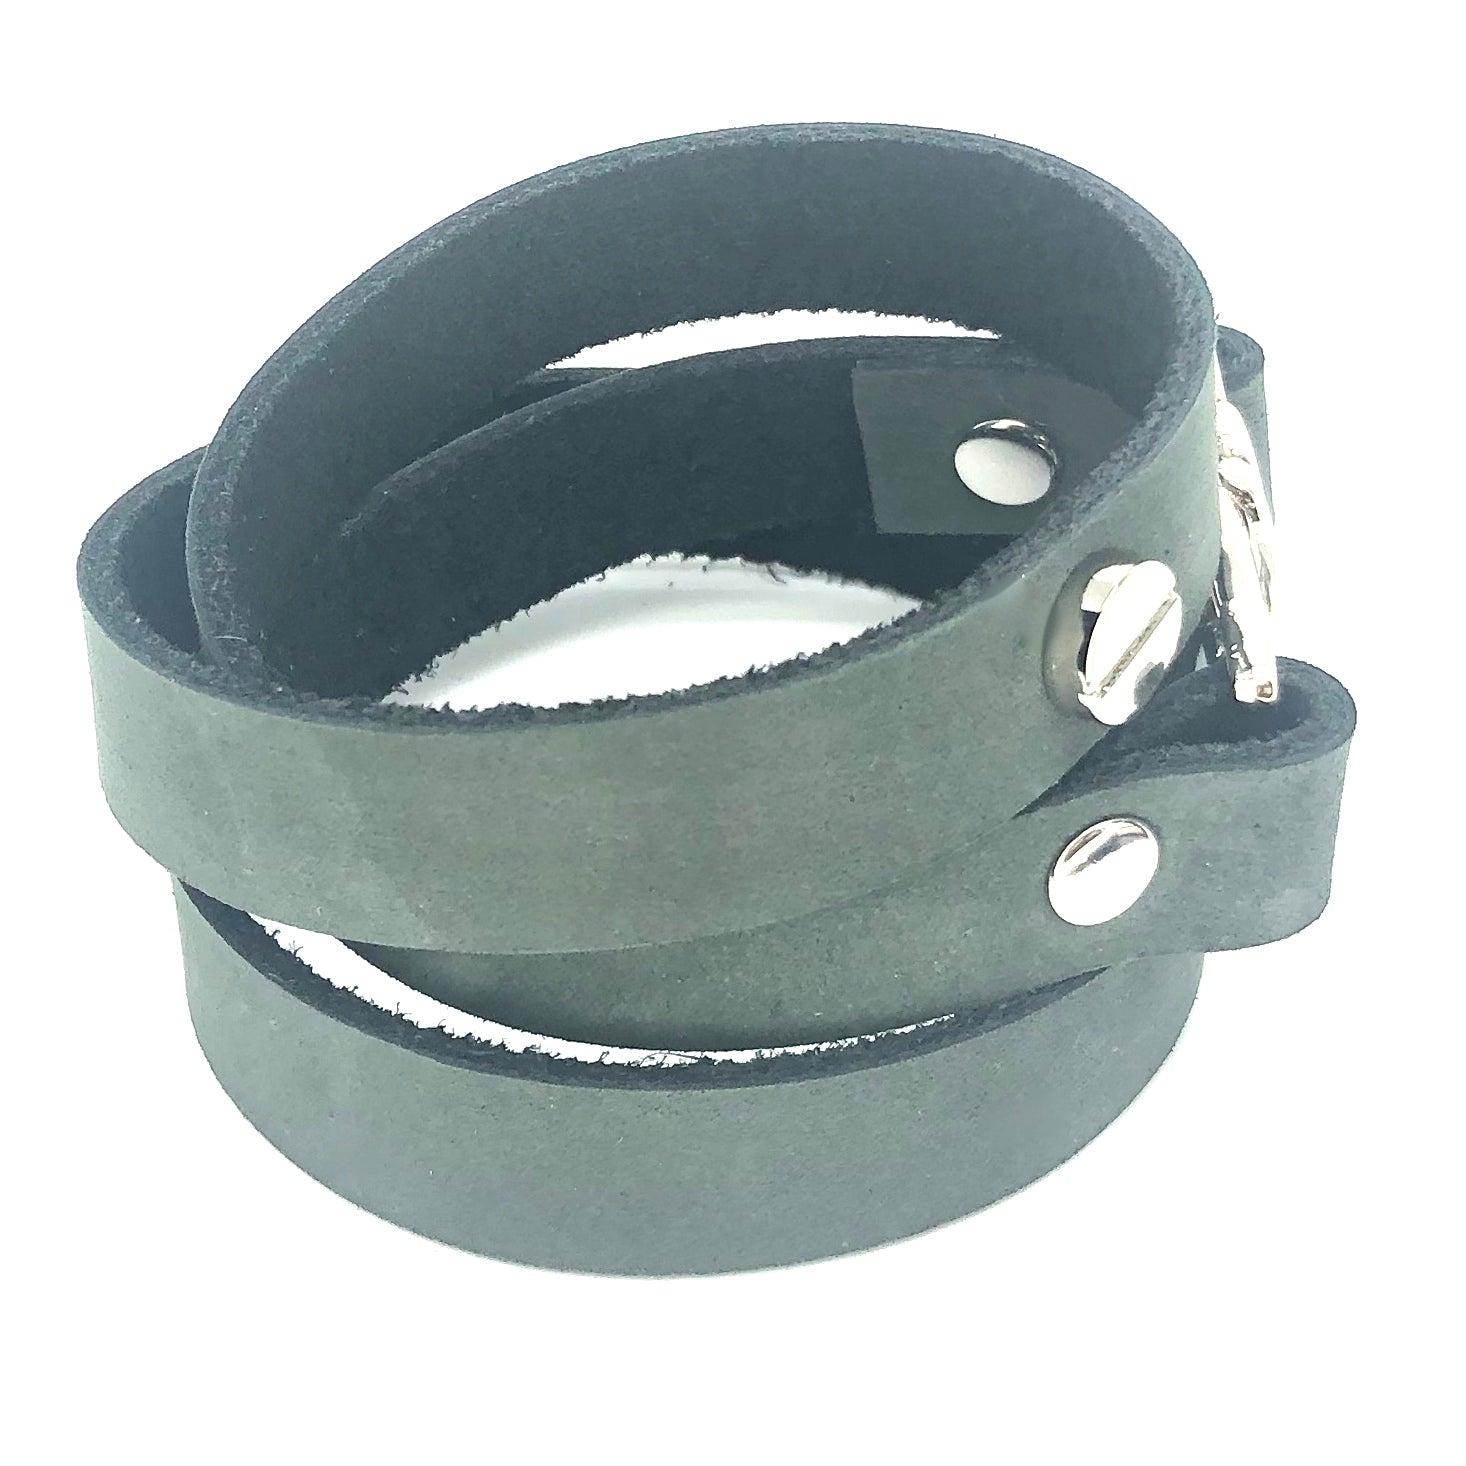 Quicksnap triple leather wraparound bracelet distressed utility leather by NYET jewelry